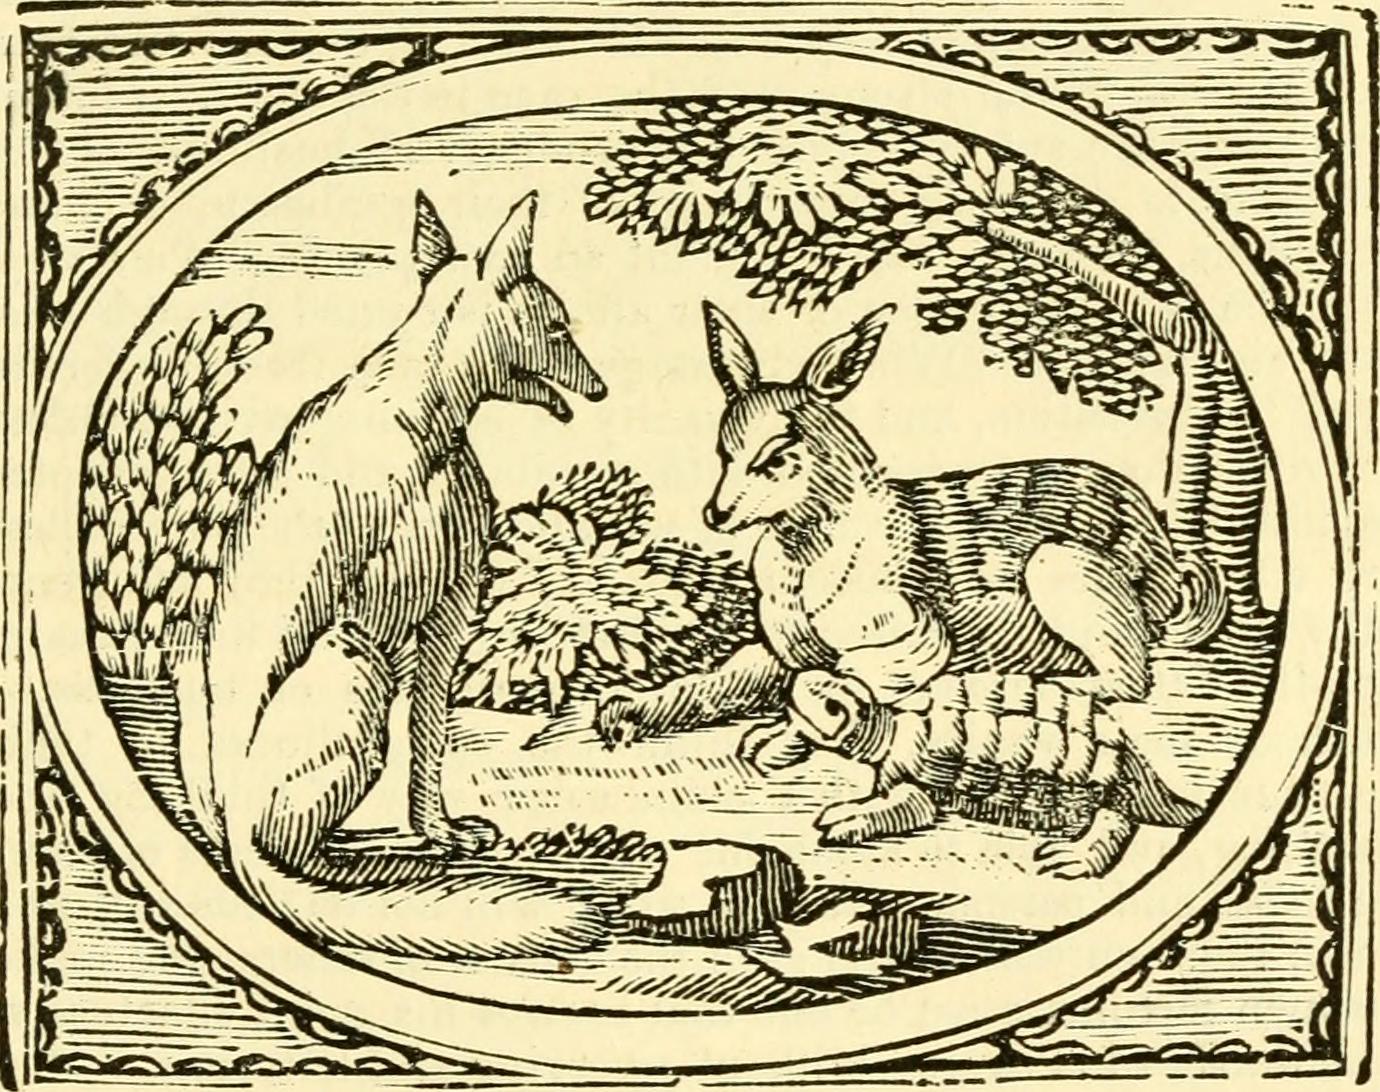 Image from page 293 of "Fables of Aesop and others" (1863)